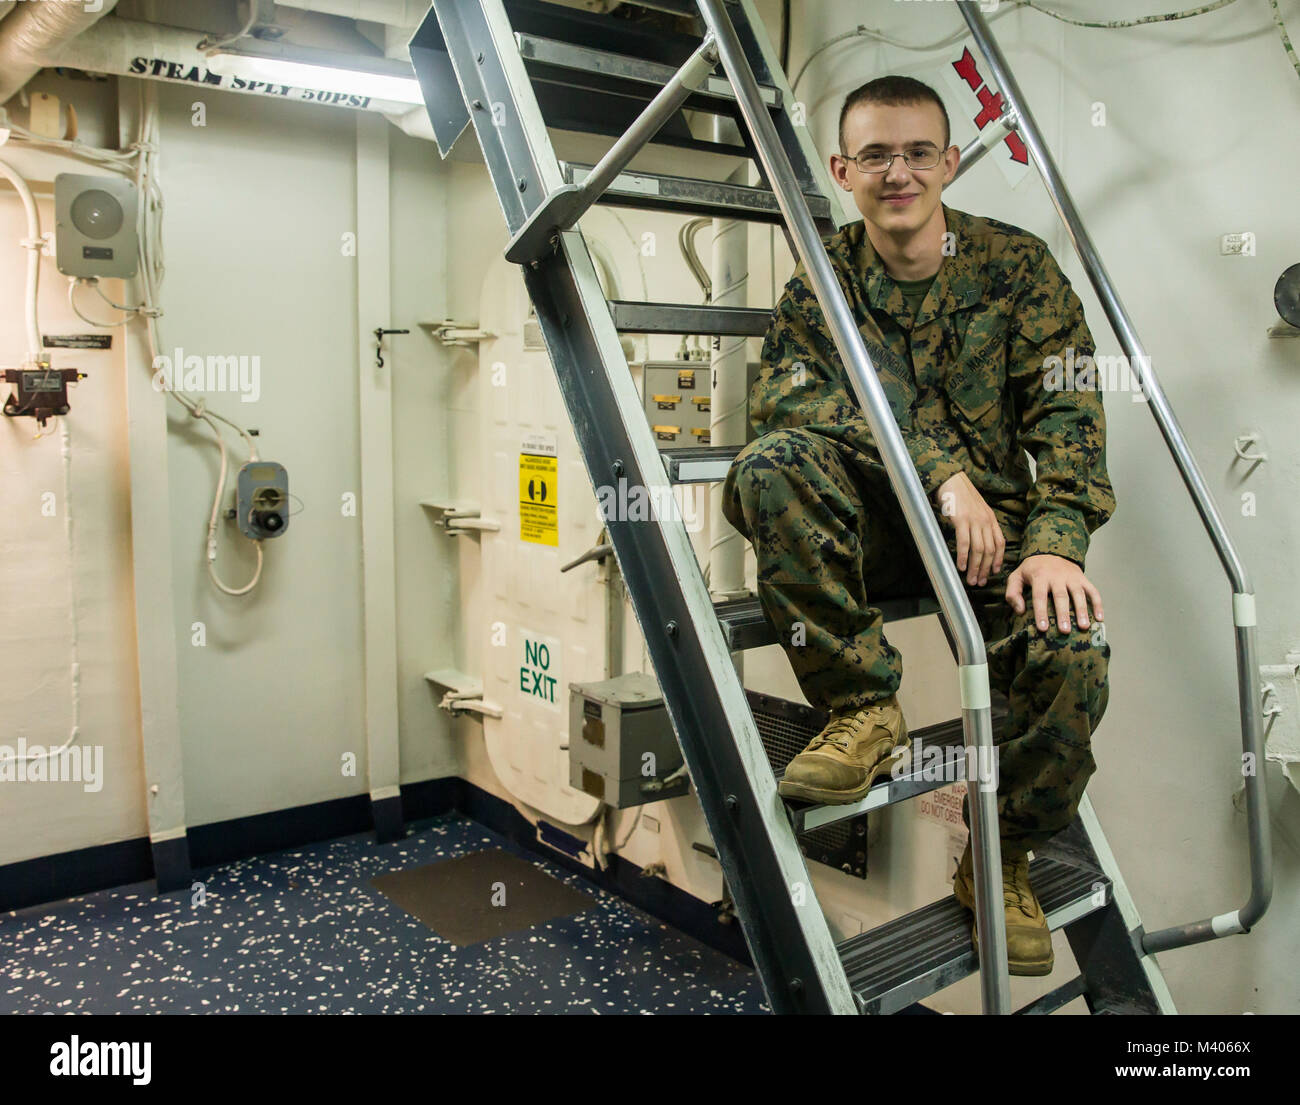 U.S. Marine Lance Cpl. Jerimiah Cunningham is a 20-year-old team leader assigned to Lima Company, 3rd Battalion, 3rd Marine Regiment currently who is currently embarked upon the U.S.S. Bonhomme Richard (LHD-6), at sea, Feb. 6, 2018. Cunningham, a Parkersburg, West Virginia native, is traveling to the Kingdom of Thailand to participate in Exercise Cobra Gold 18. The U.S. and Kingdom of Thailand co-lead annual exercise will be held from Feb. 13-23 with up to seven nations participating. (U.S. Marine Corps photo by Sgt. Ricky Gomez) Stock Photo